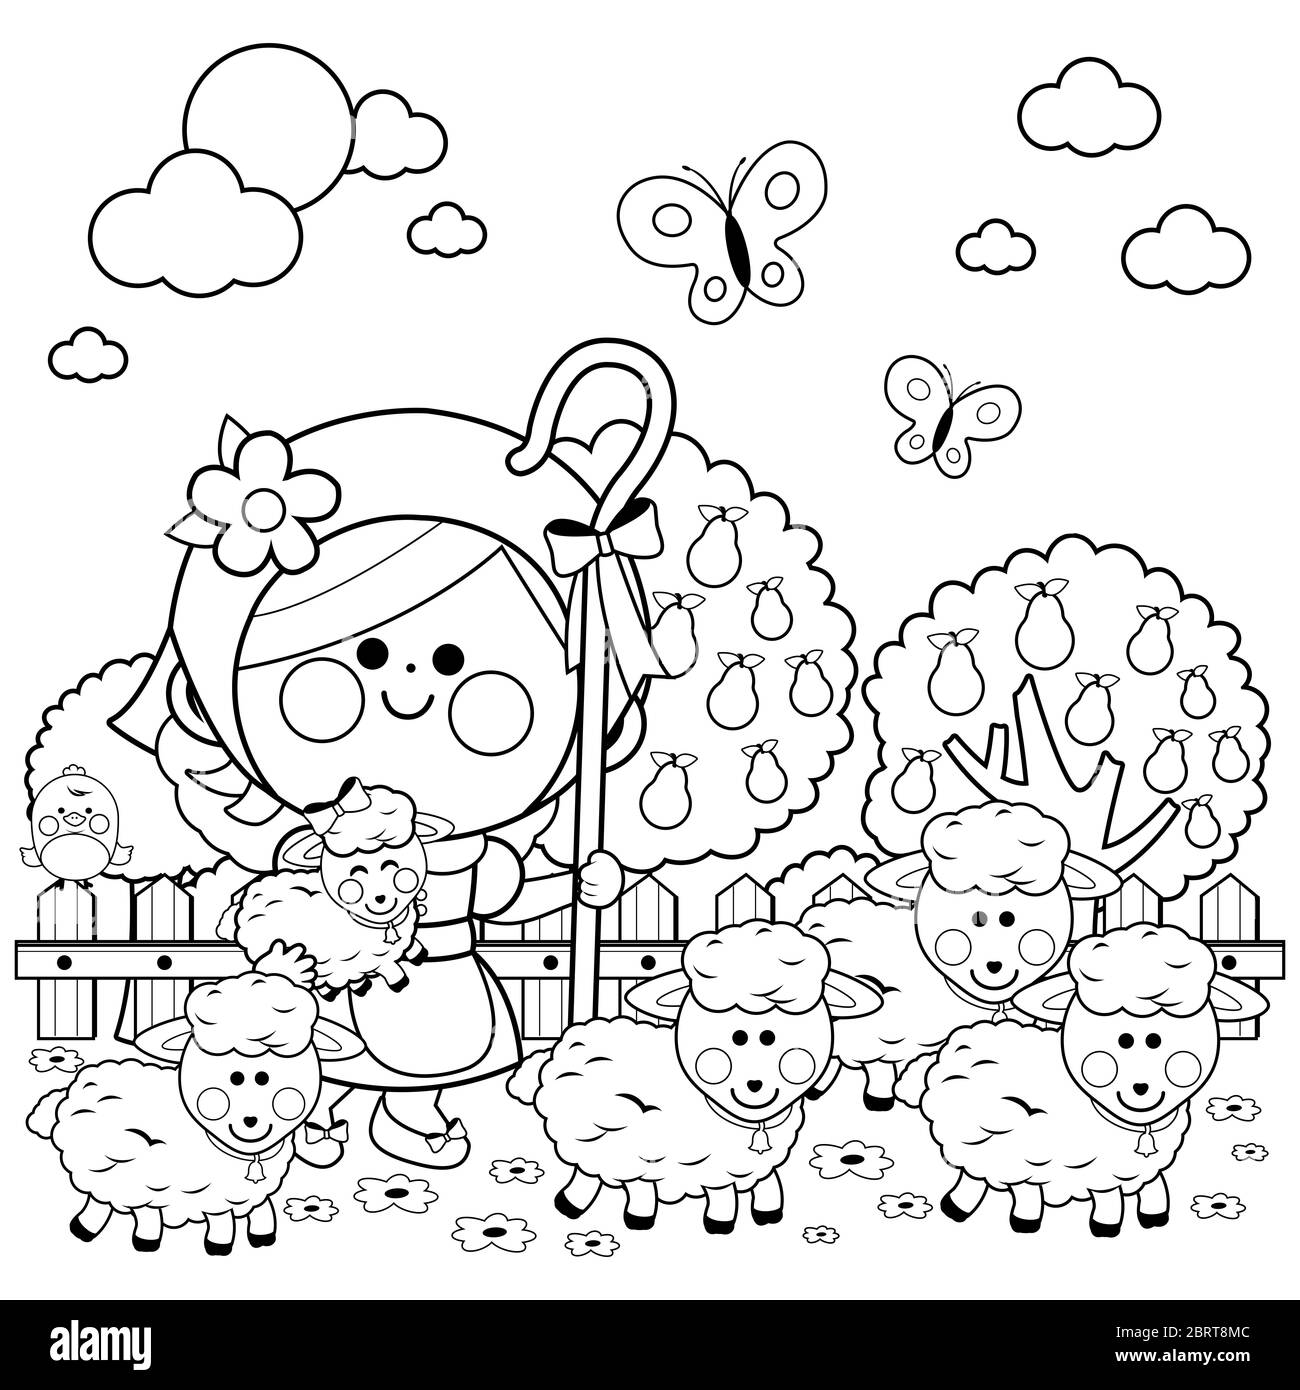 Little shepherdess girl with sheep. Black and white coloring page Stock Photo